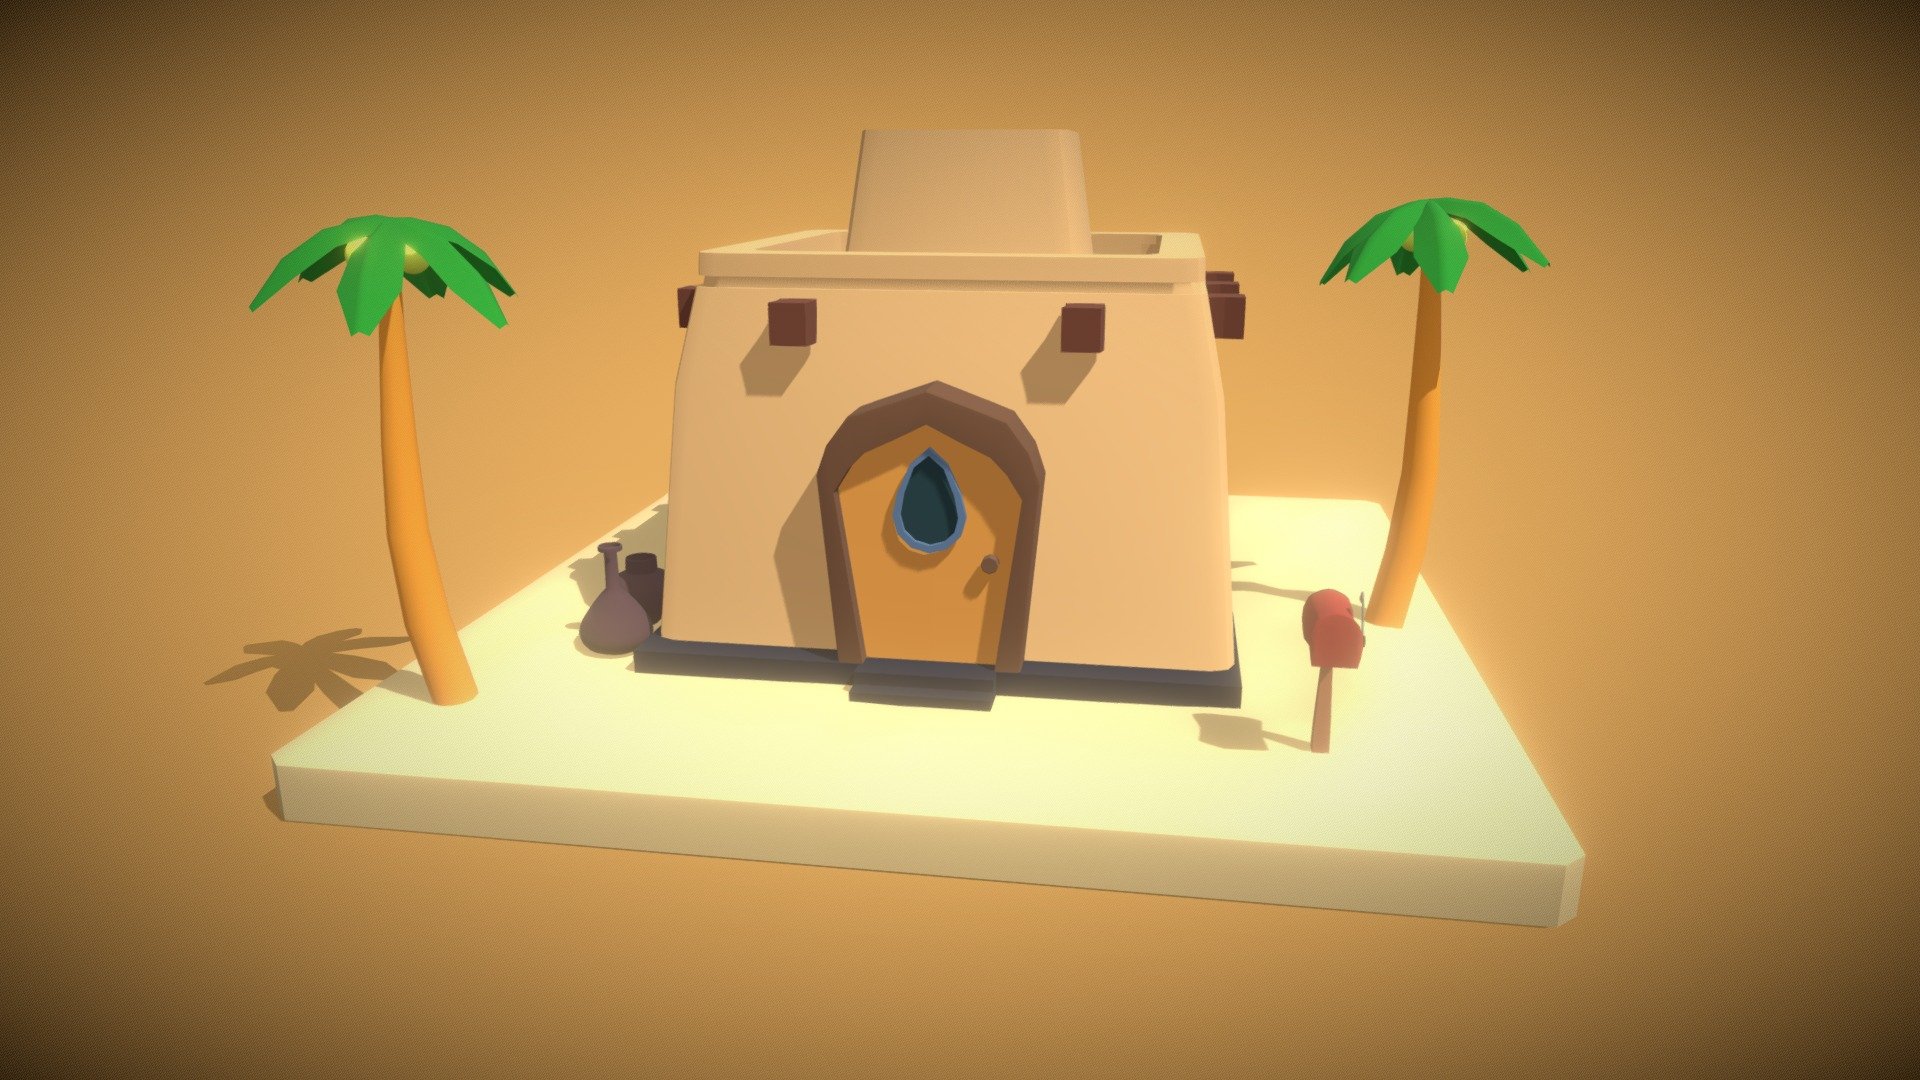 After a new year's eve, i have been modeling a house that is inspired by egyptian environment so i made cozy house 3d model